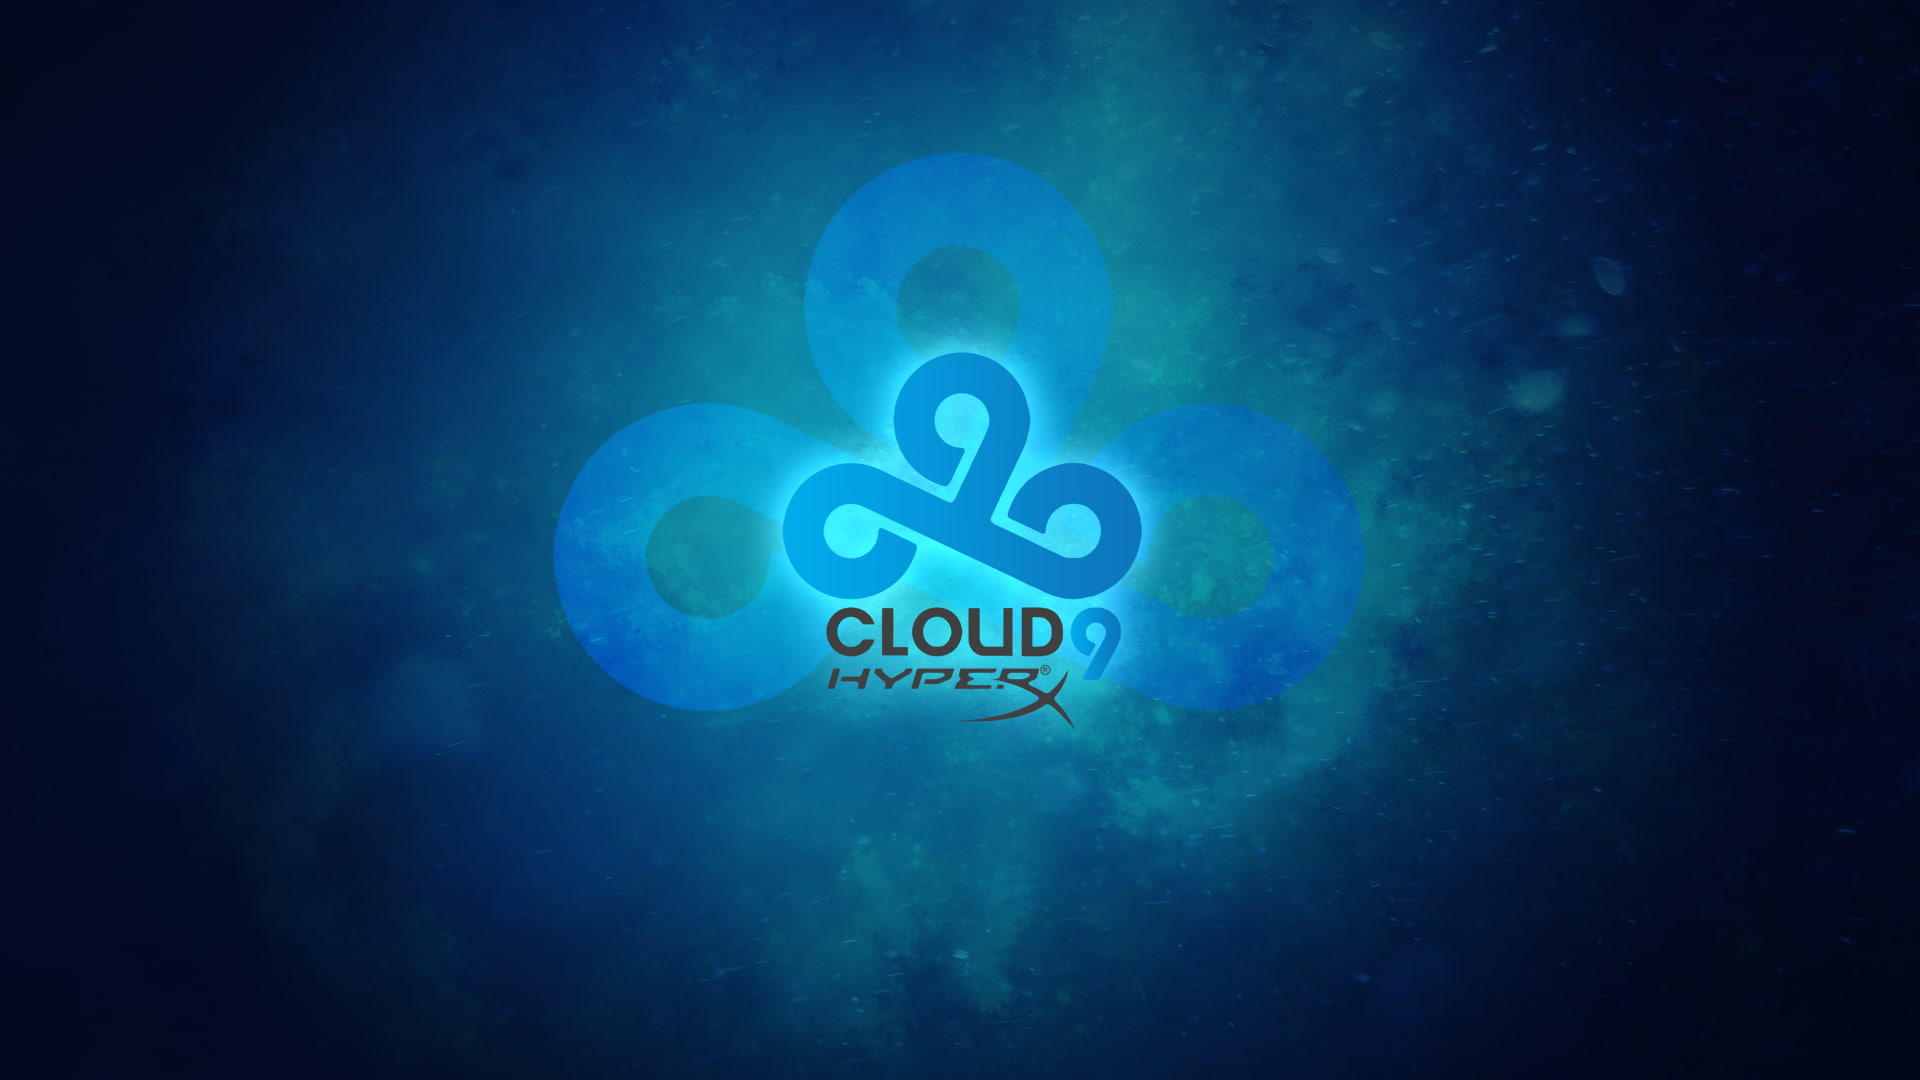 video games, Cloud9, Counter-Strike: Global Offensive